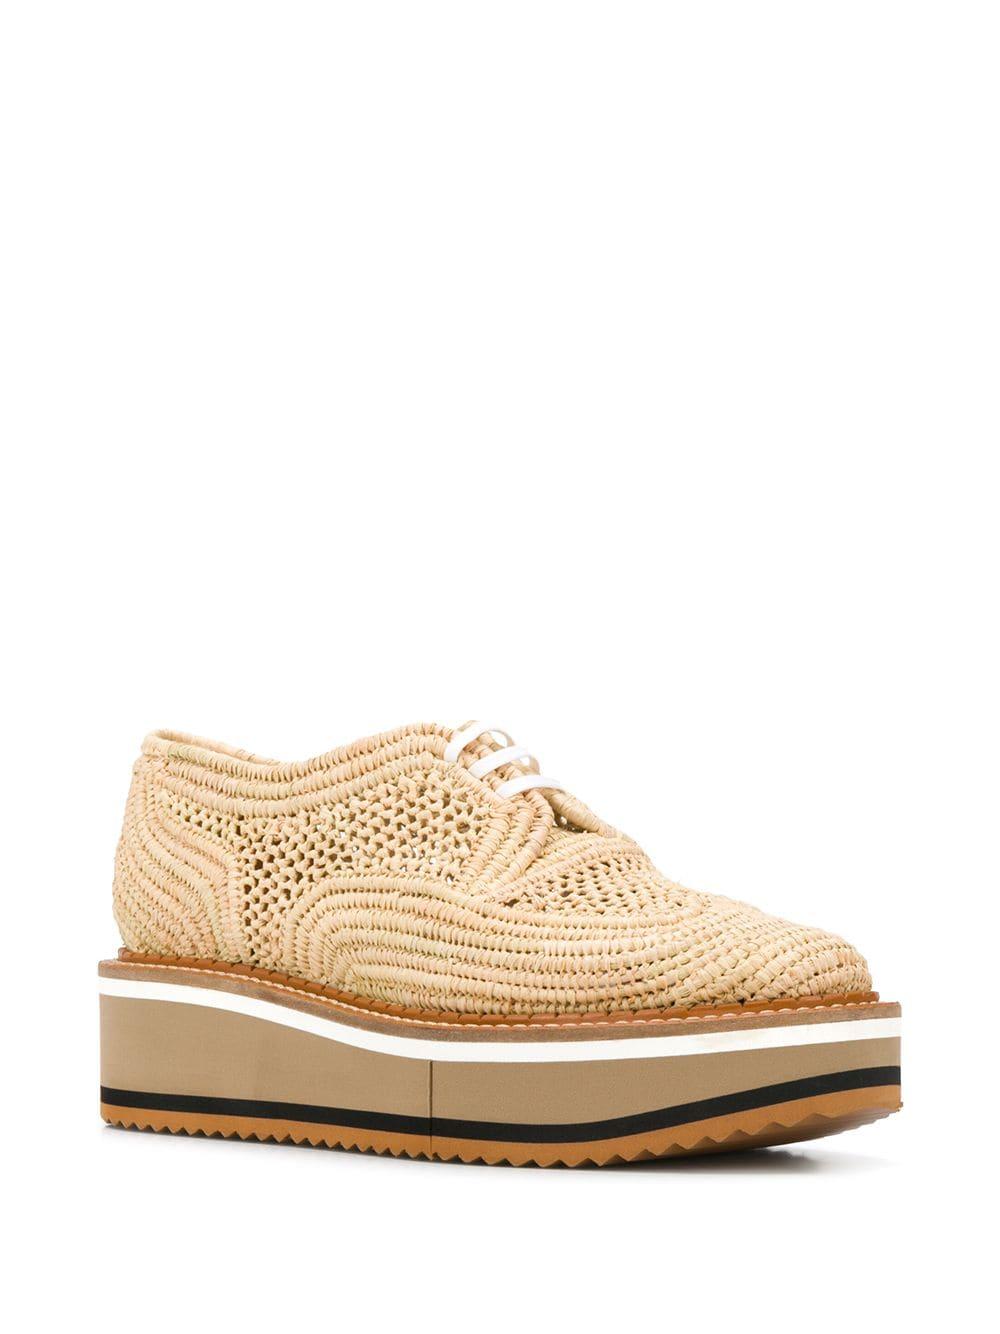 Robert Clergerie Rubber Birdie Shoes in Natural - Lyst